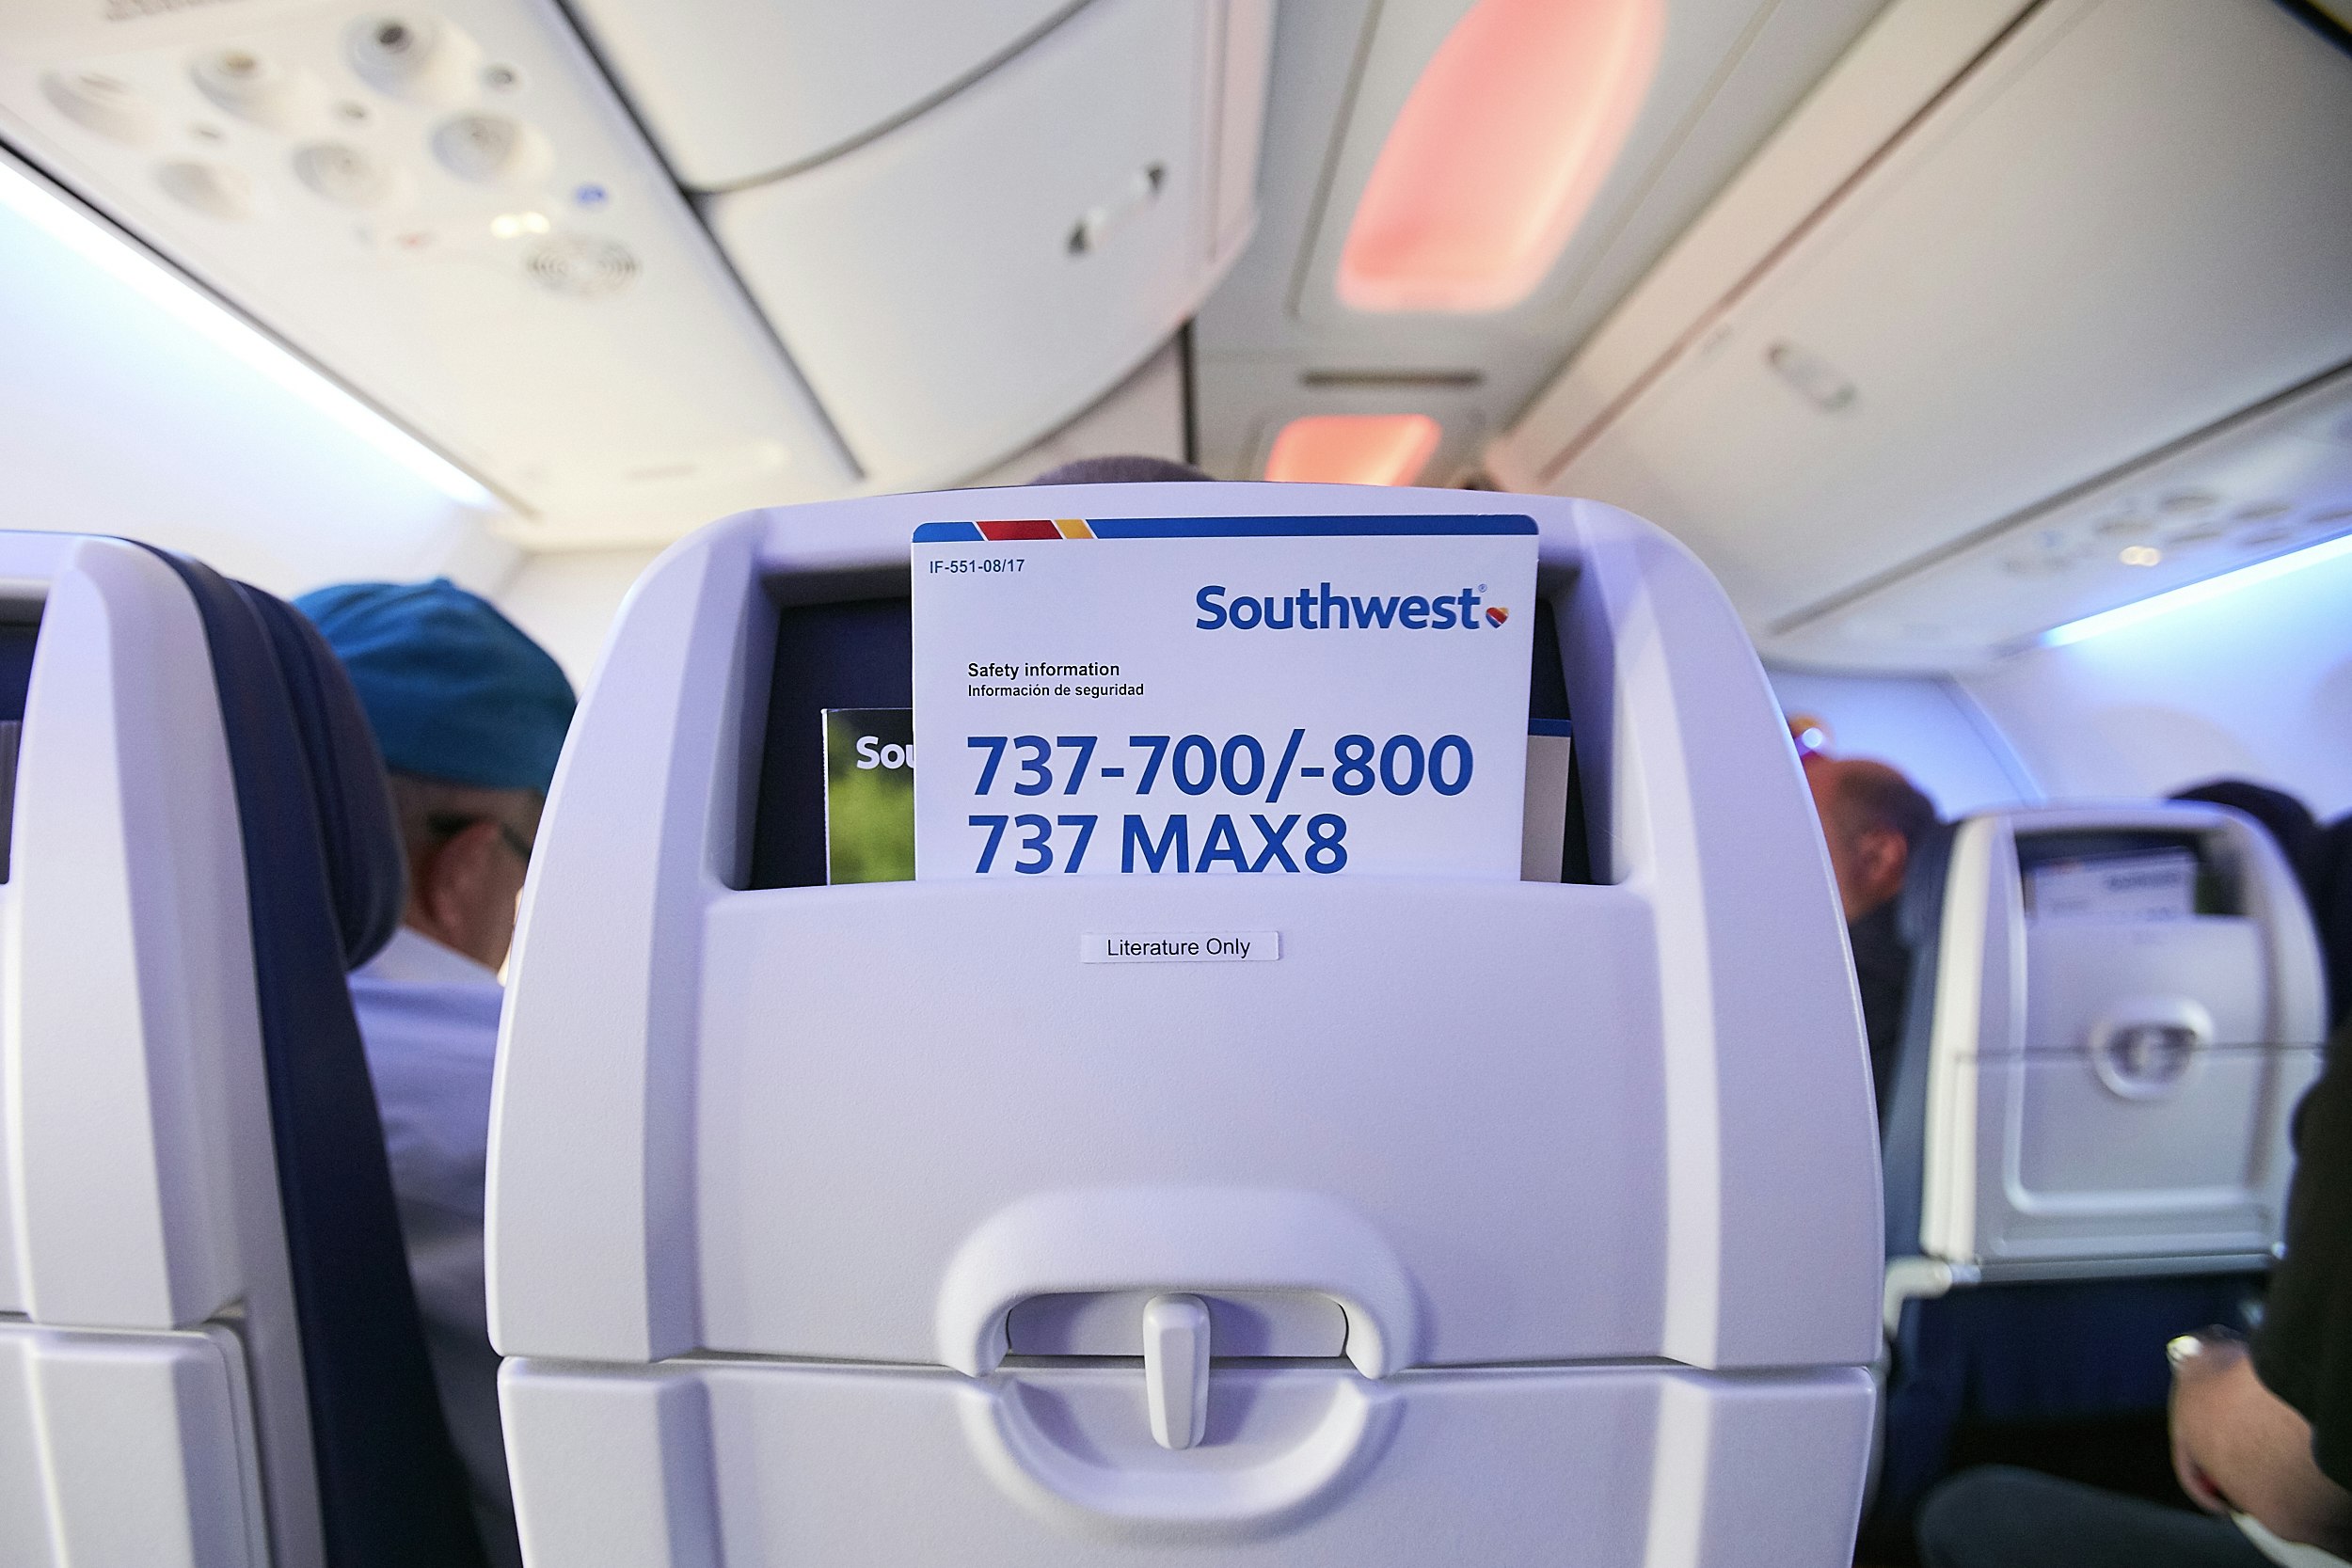 The seatback pocket of Southwest's Boeing 737 Max 